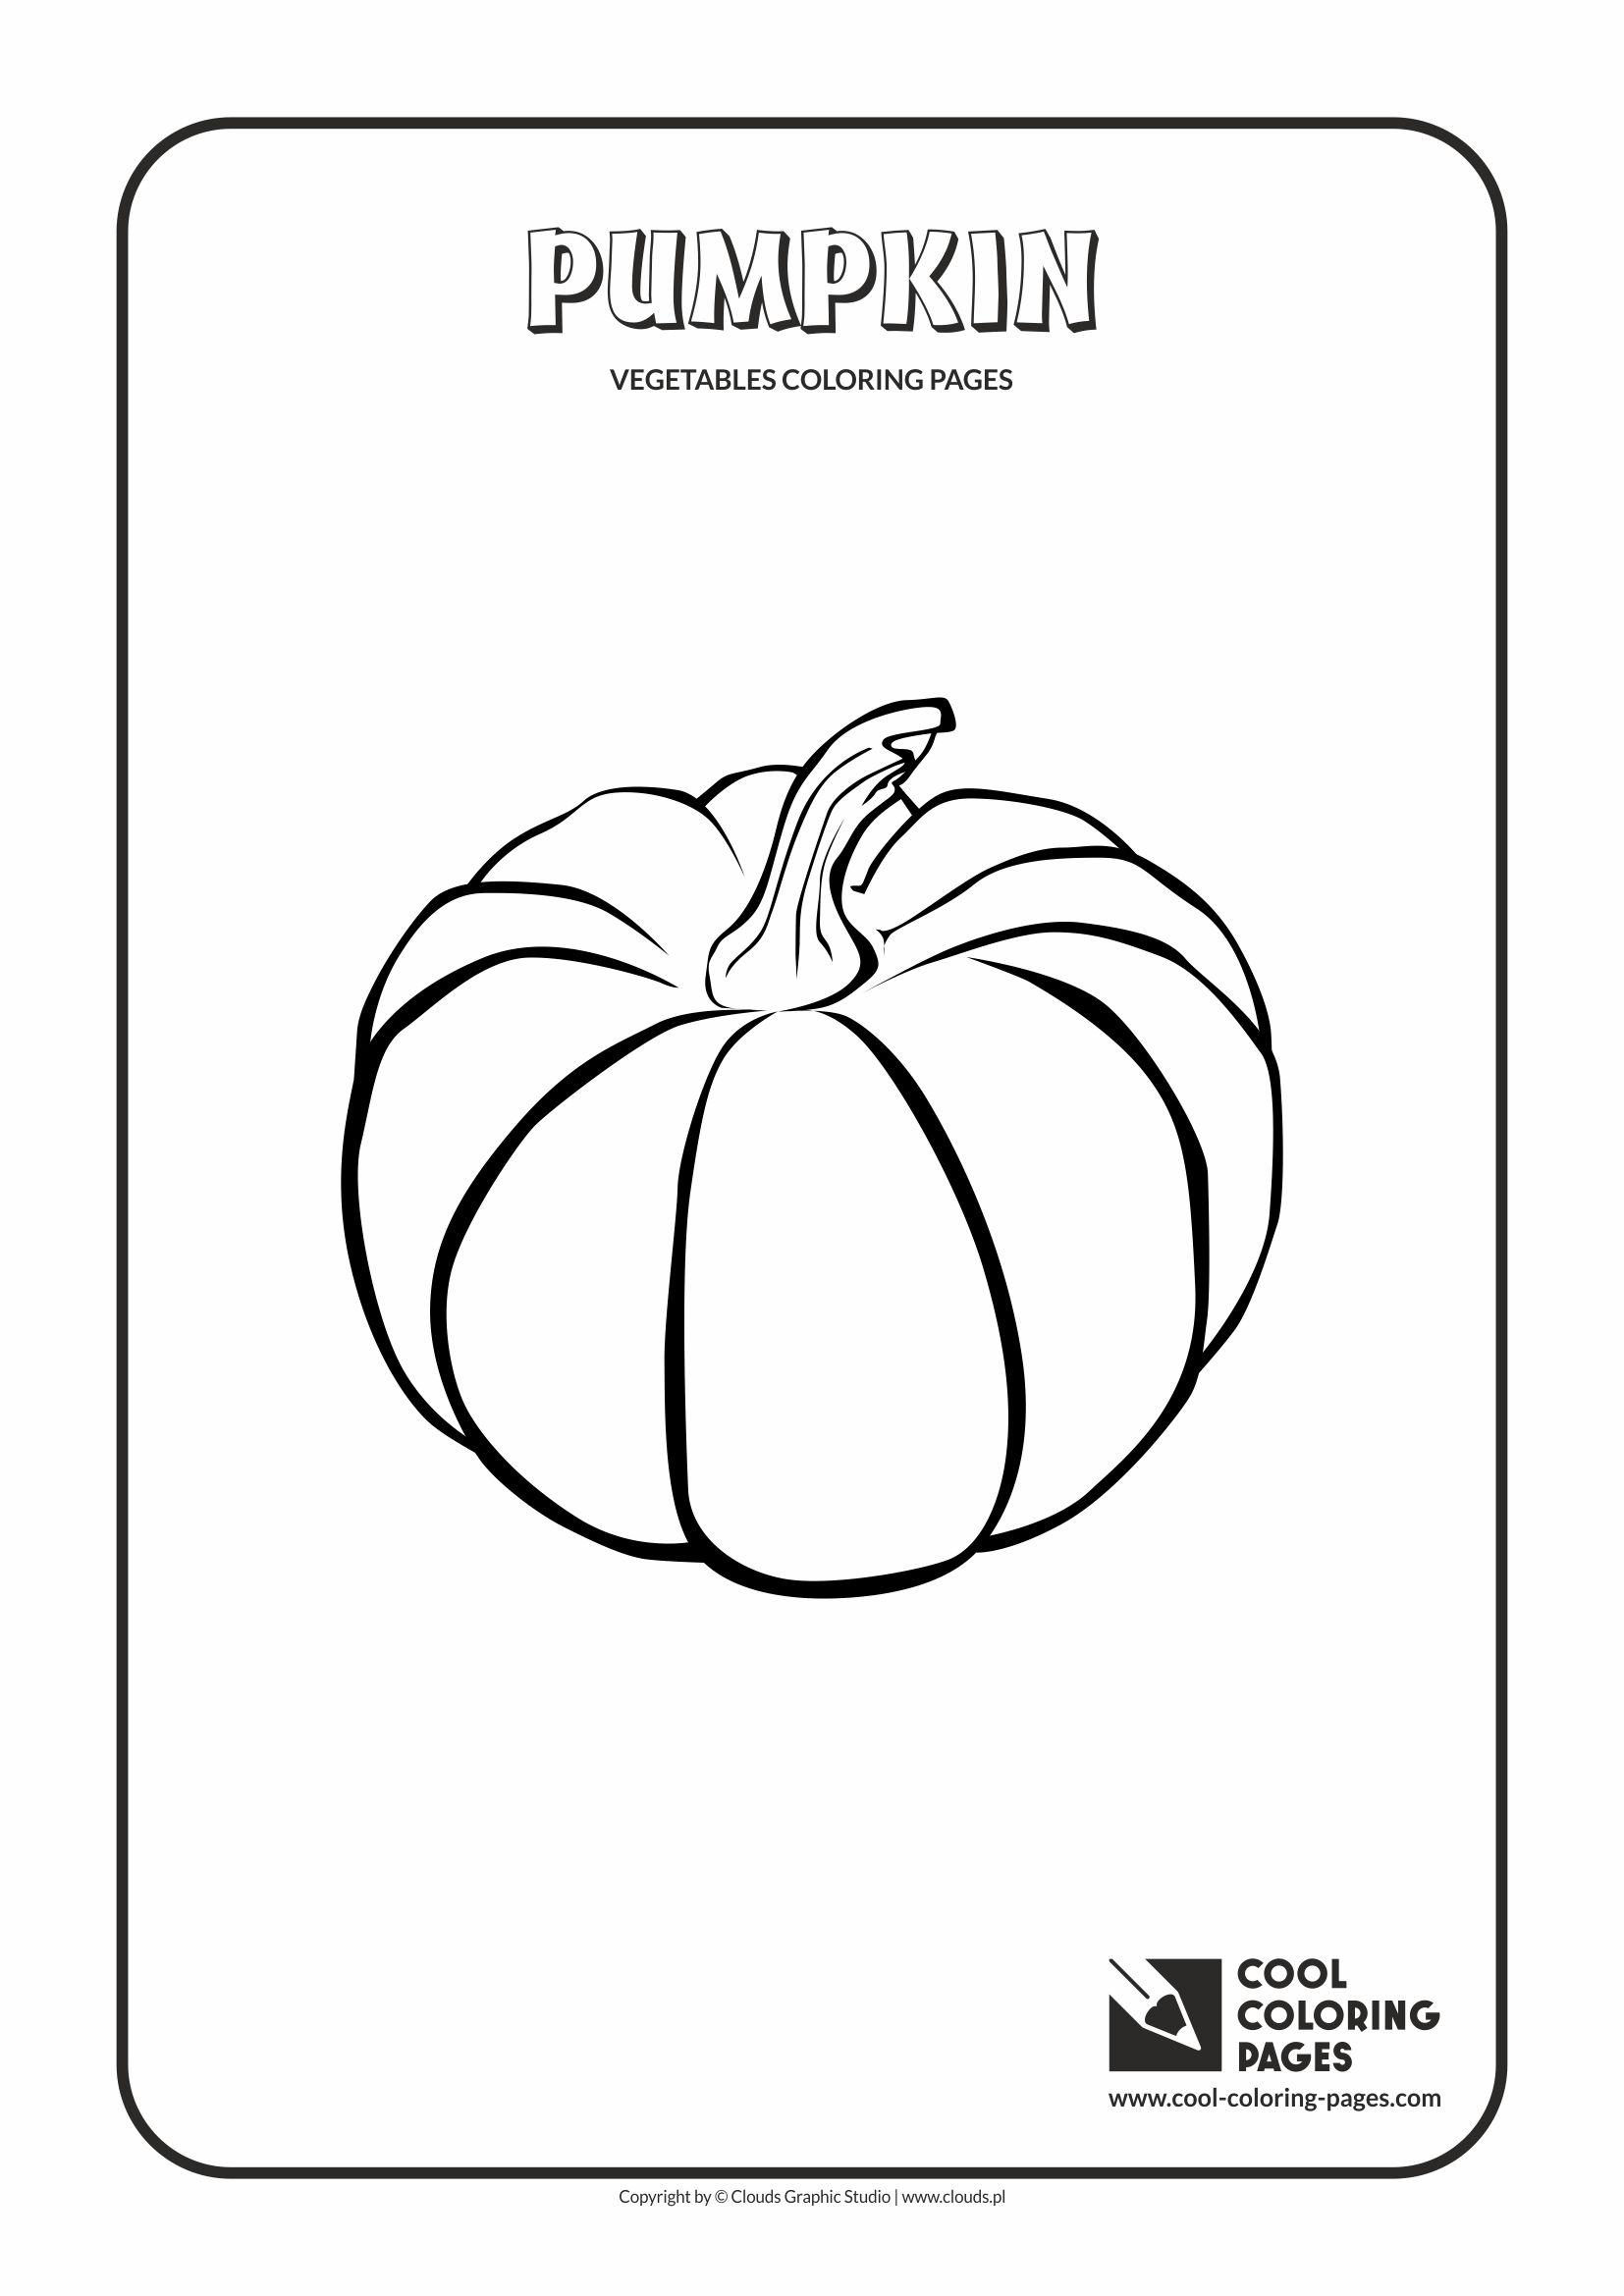 Cool Coloring Pages - Plants / Pumpkin / Coloring page with pumpkin